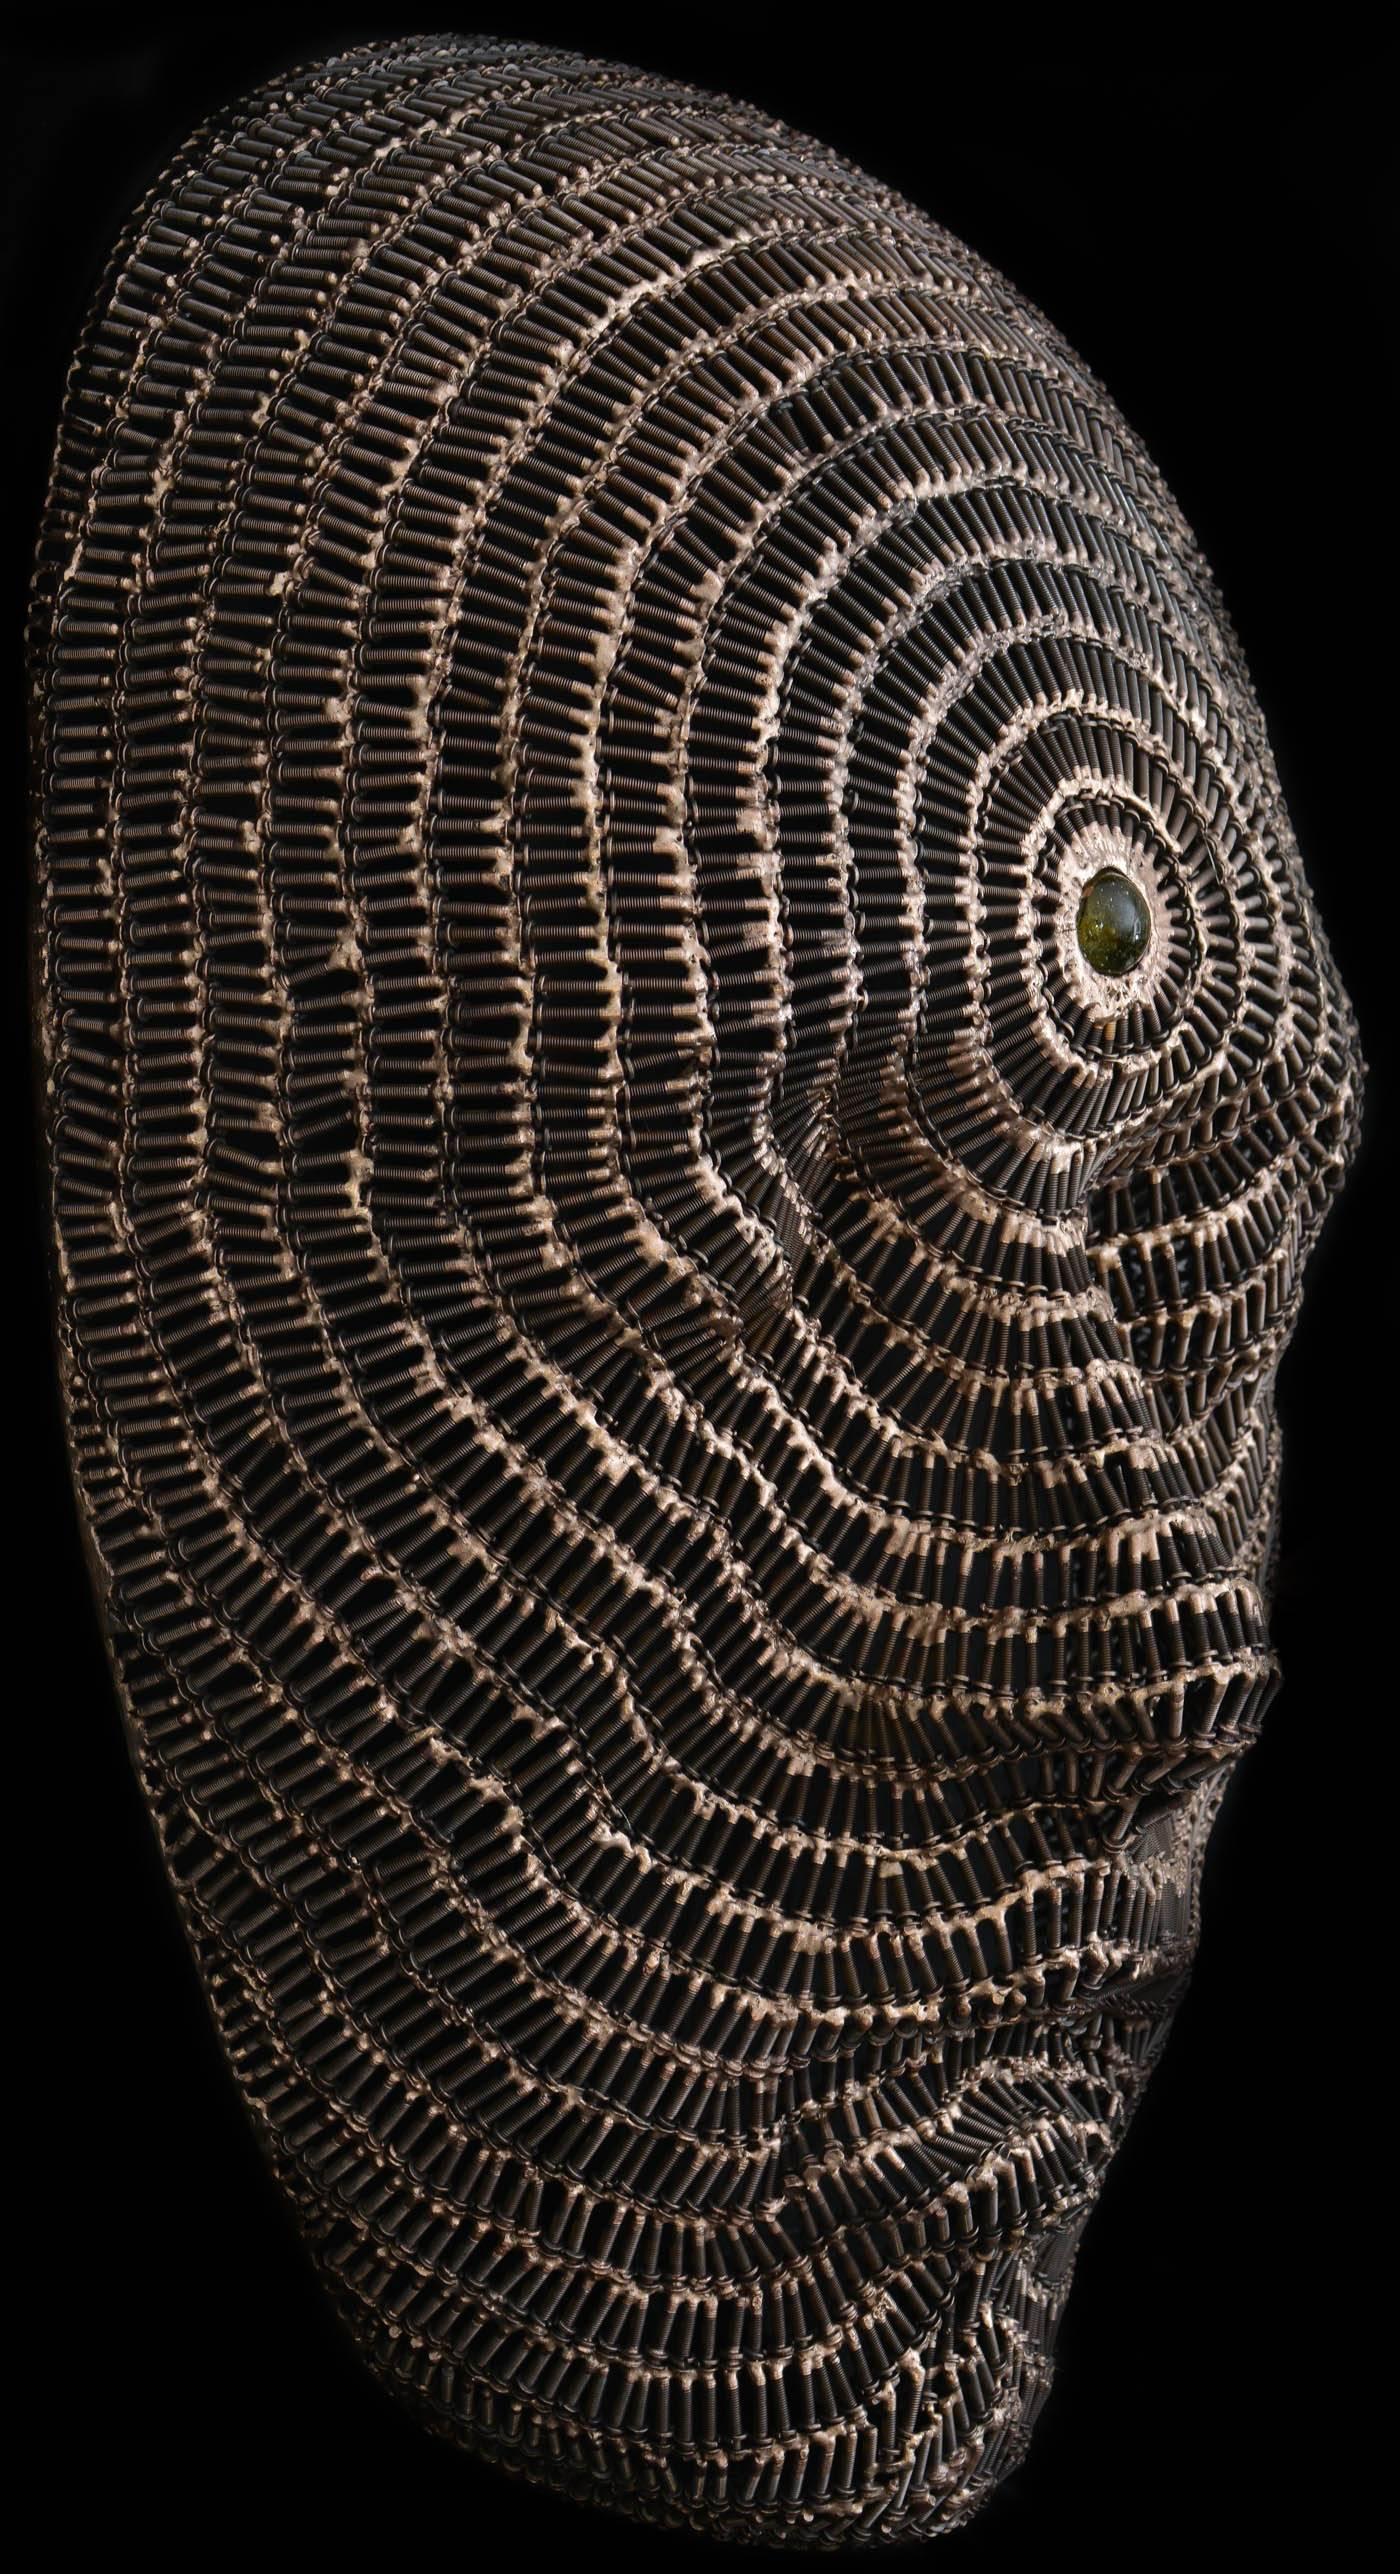 Rows of polished screws define the contours of a large face merging into concentric circles around a glass stone at the forehead. The title of this contemplative bronze and steel wall sculpture refers to the third eye or 6th chakra in the Hindu